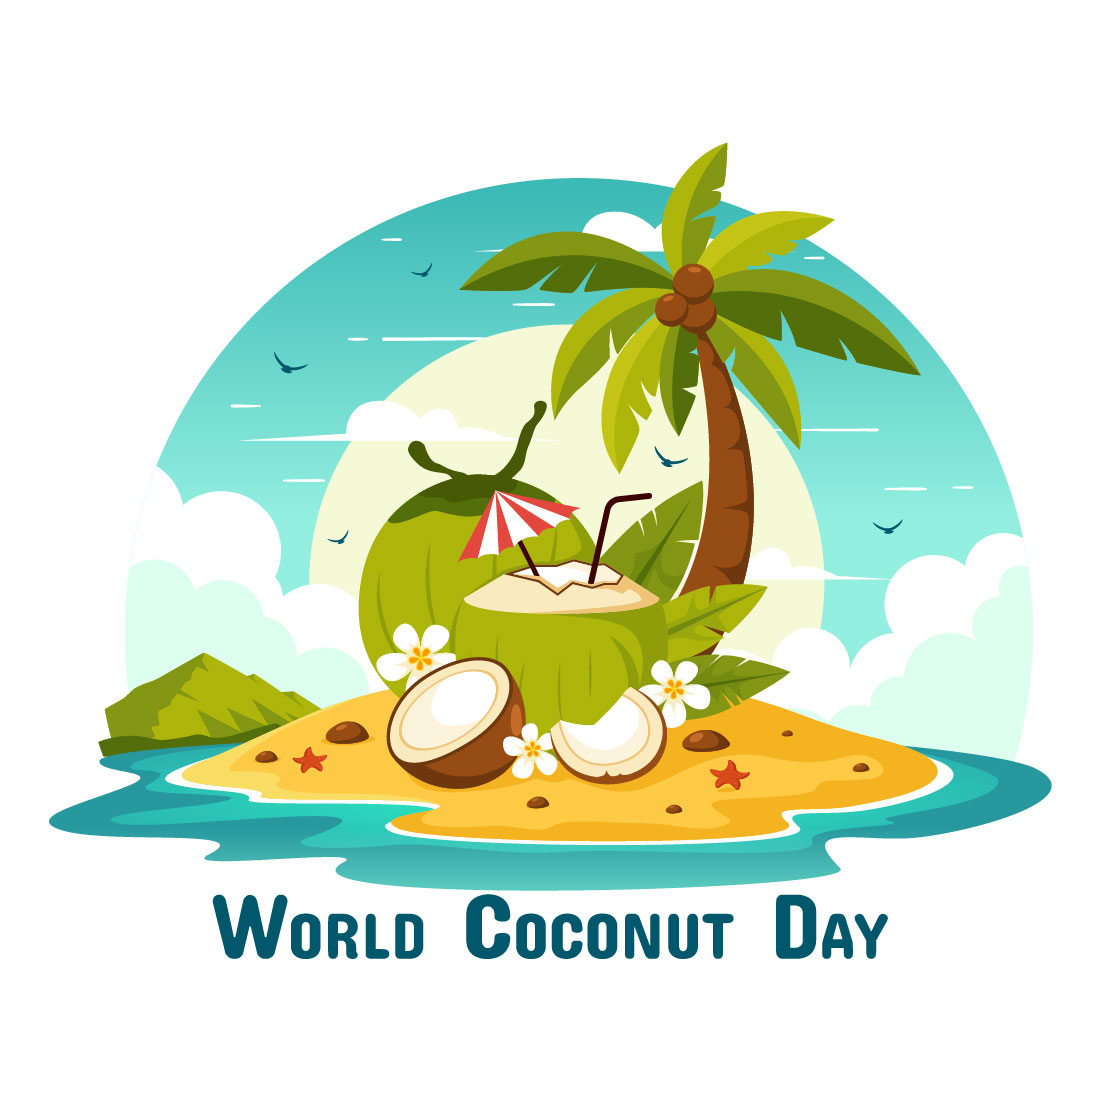 10 World Coconut Day Illustration preview image.